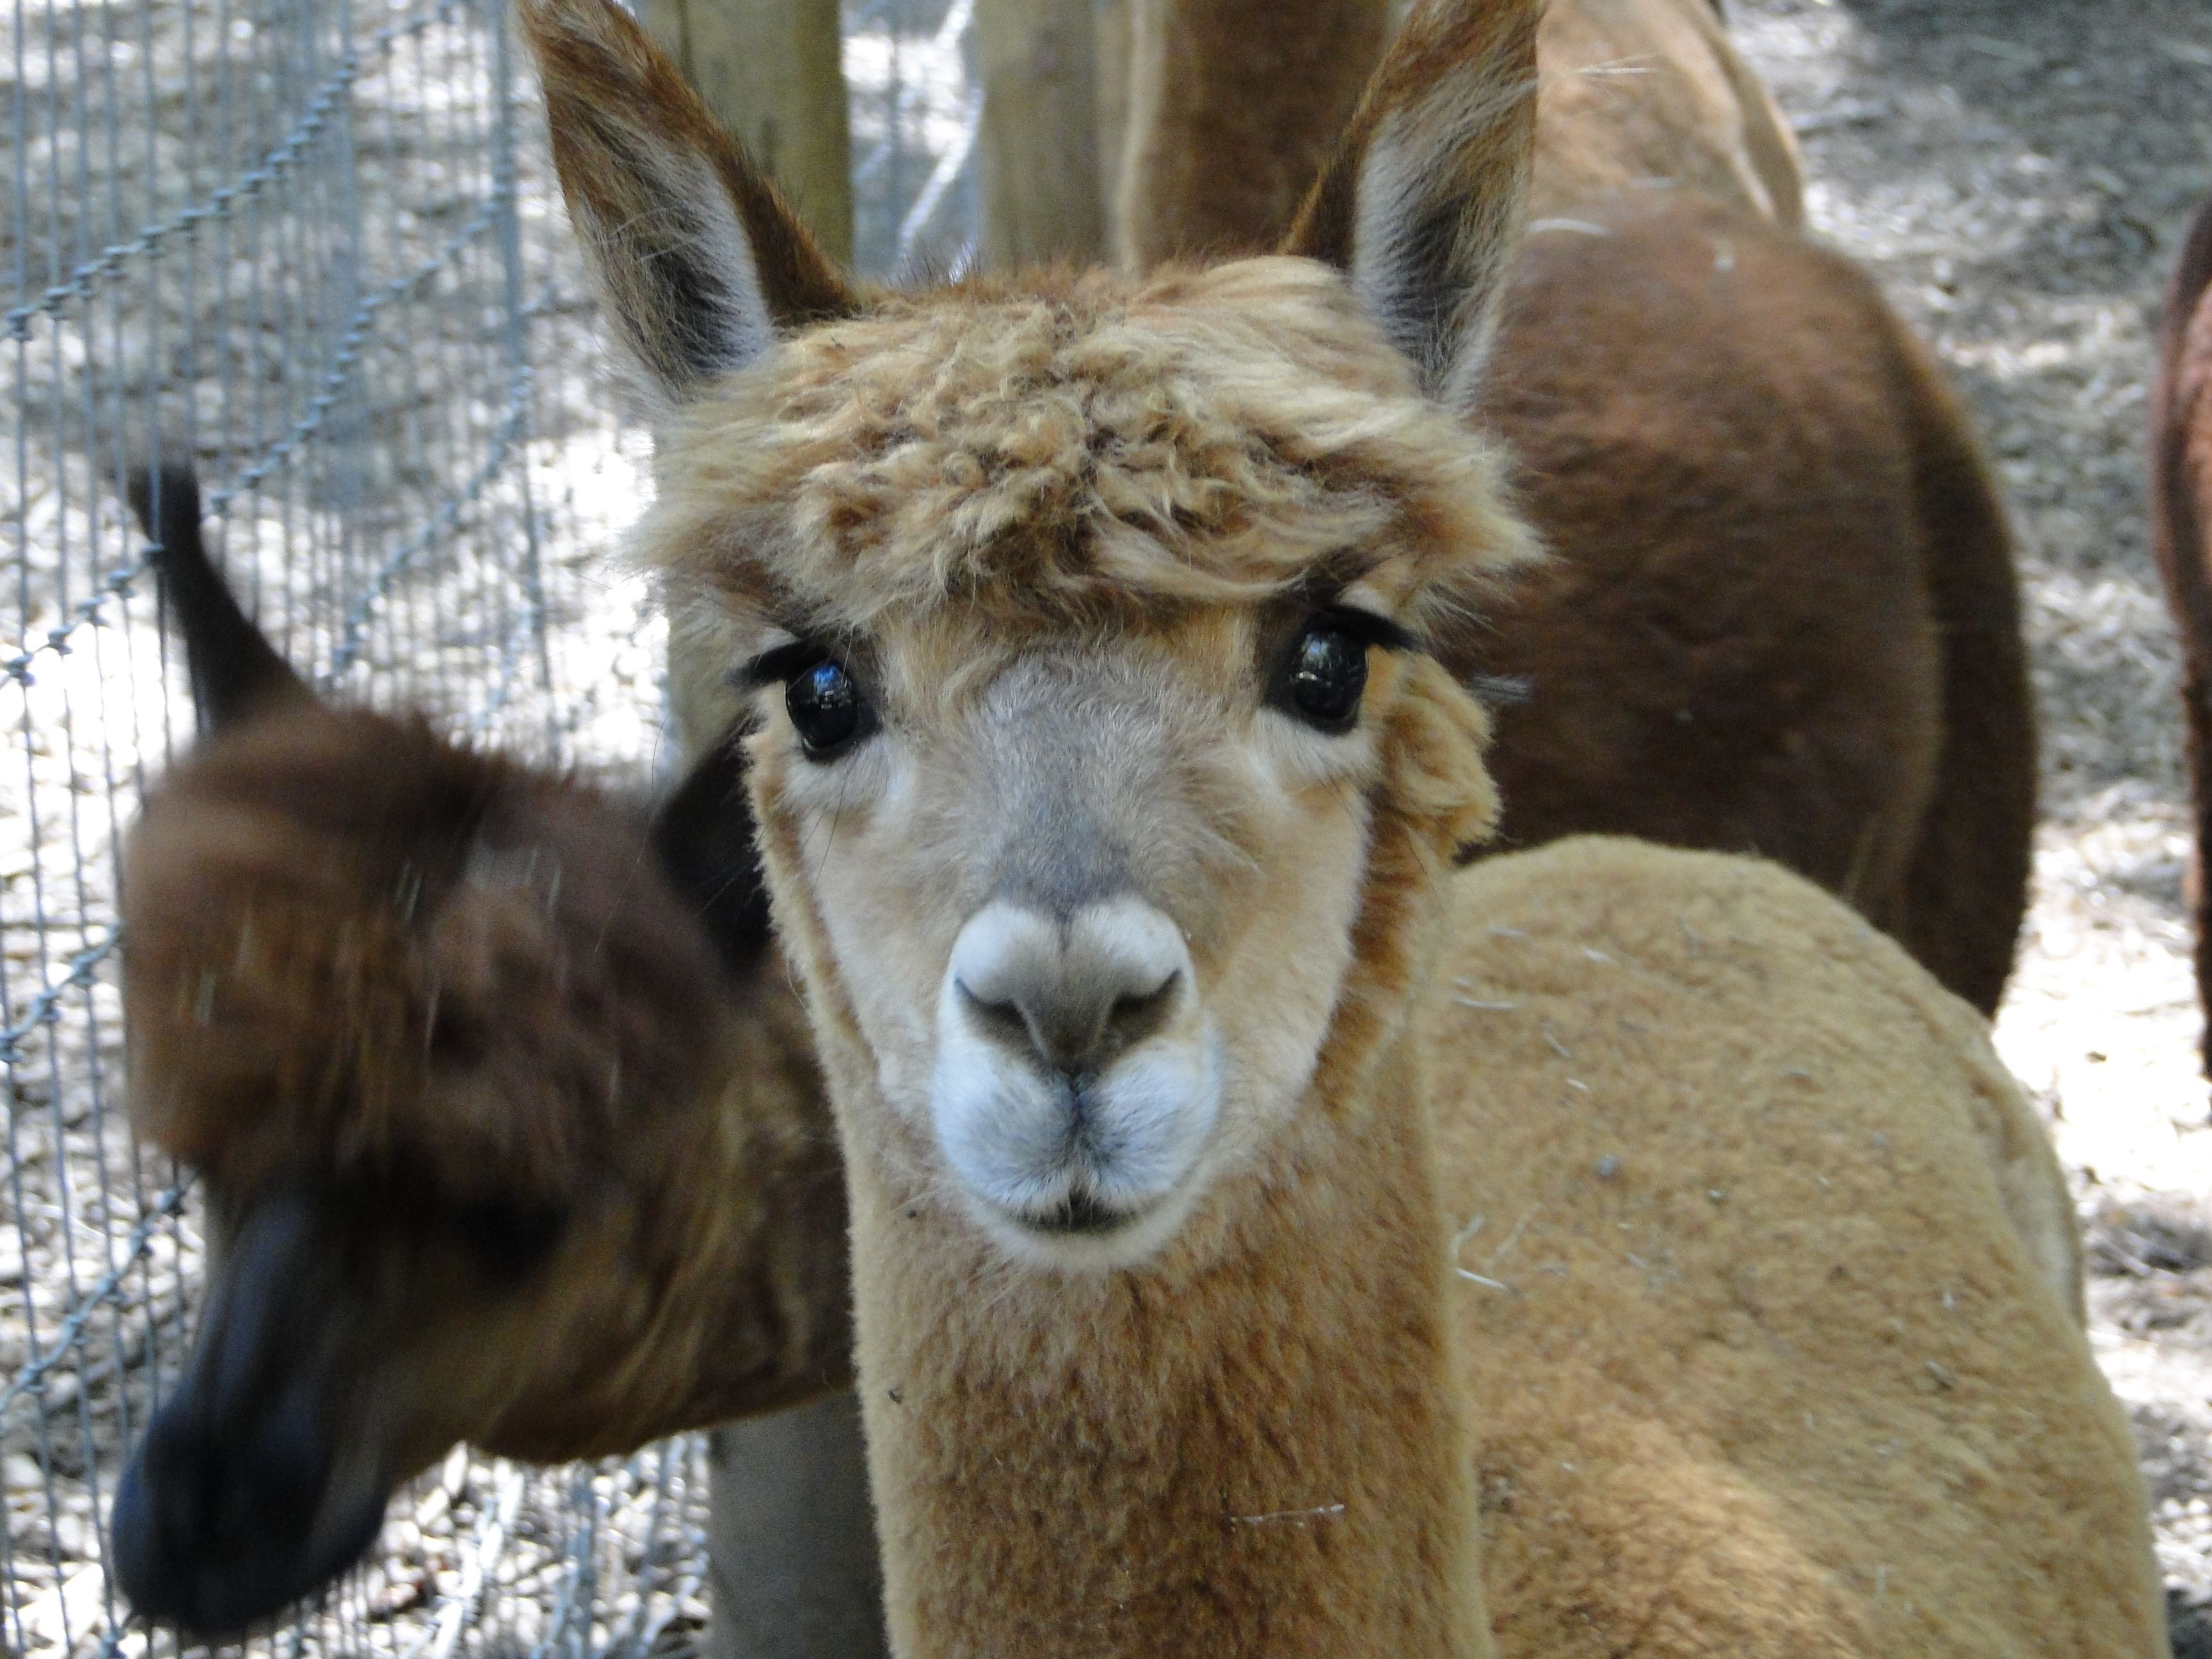 The Monkey Business stare | Alpacas and other camelids | Pinterest ...